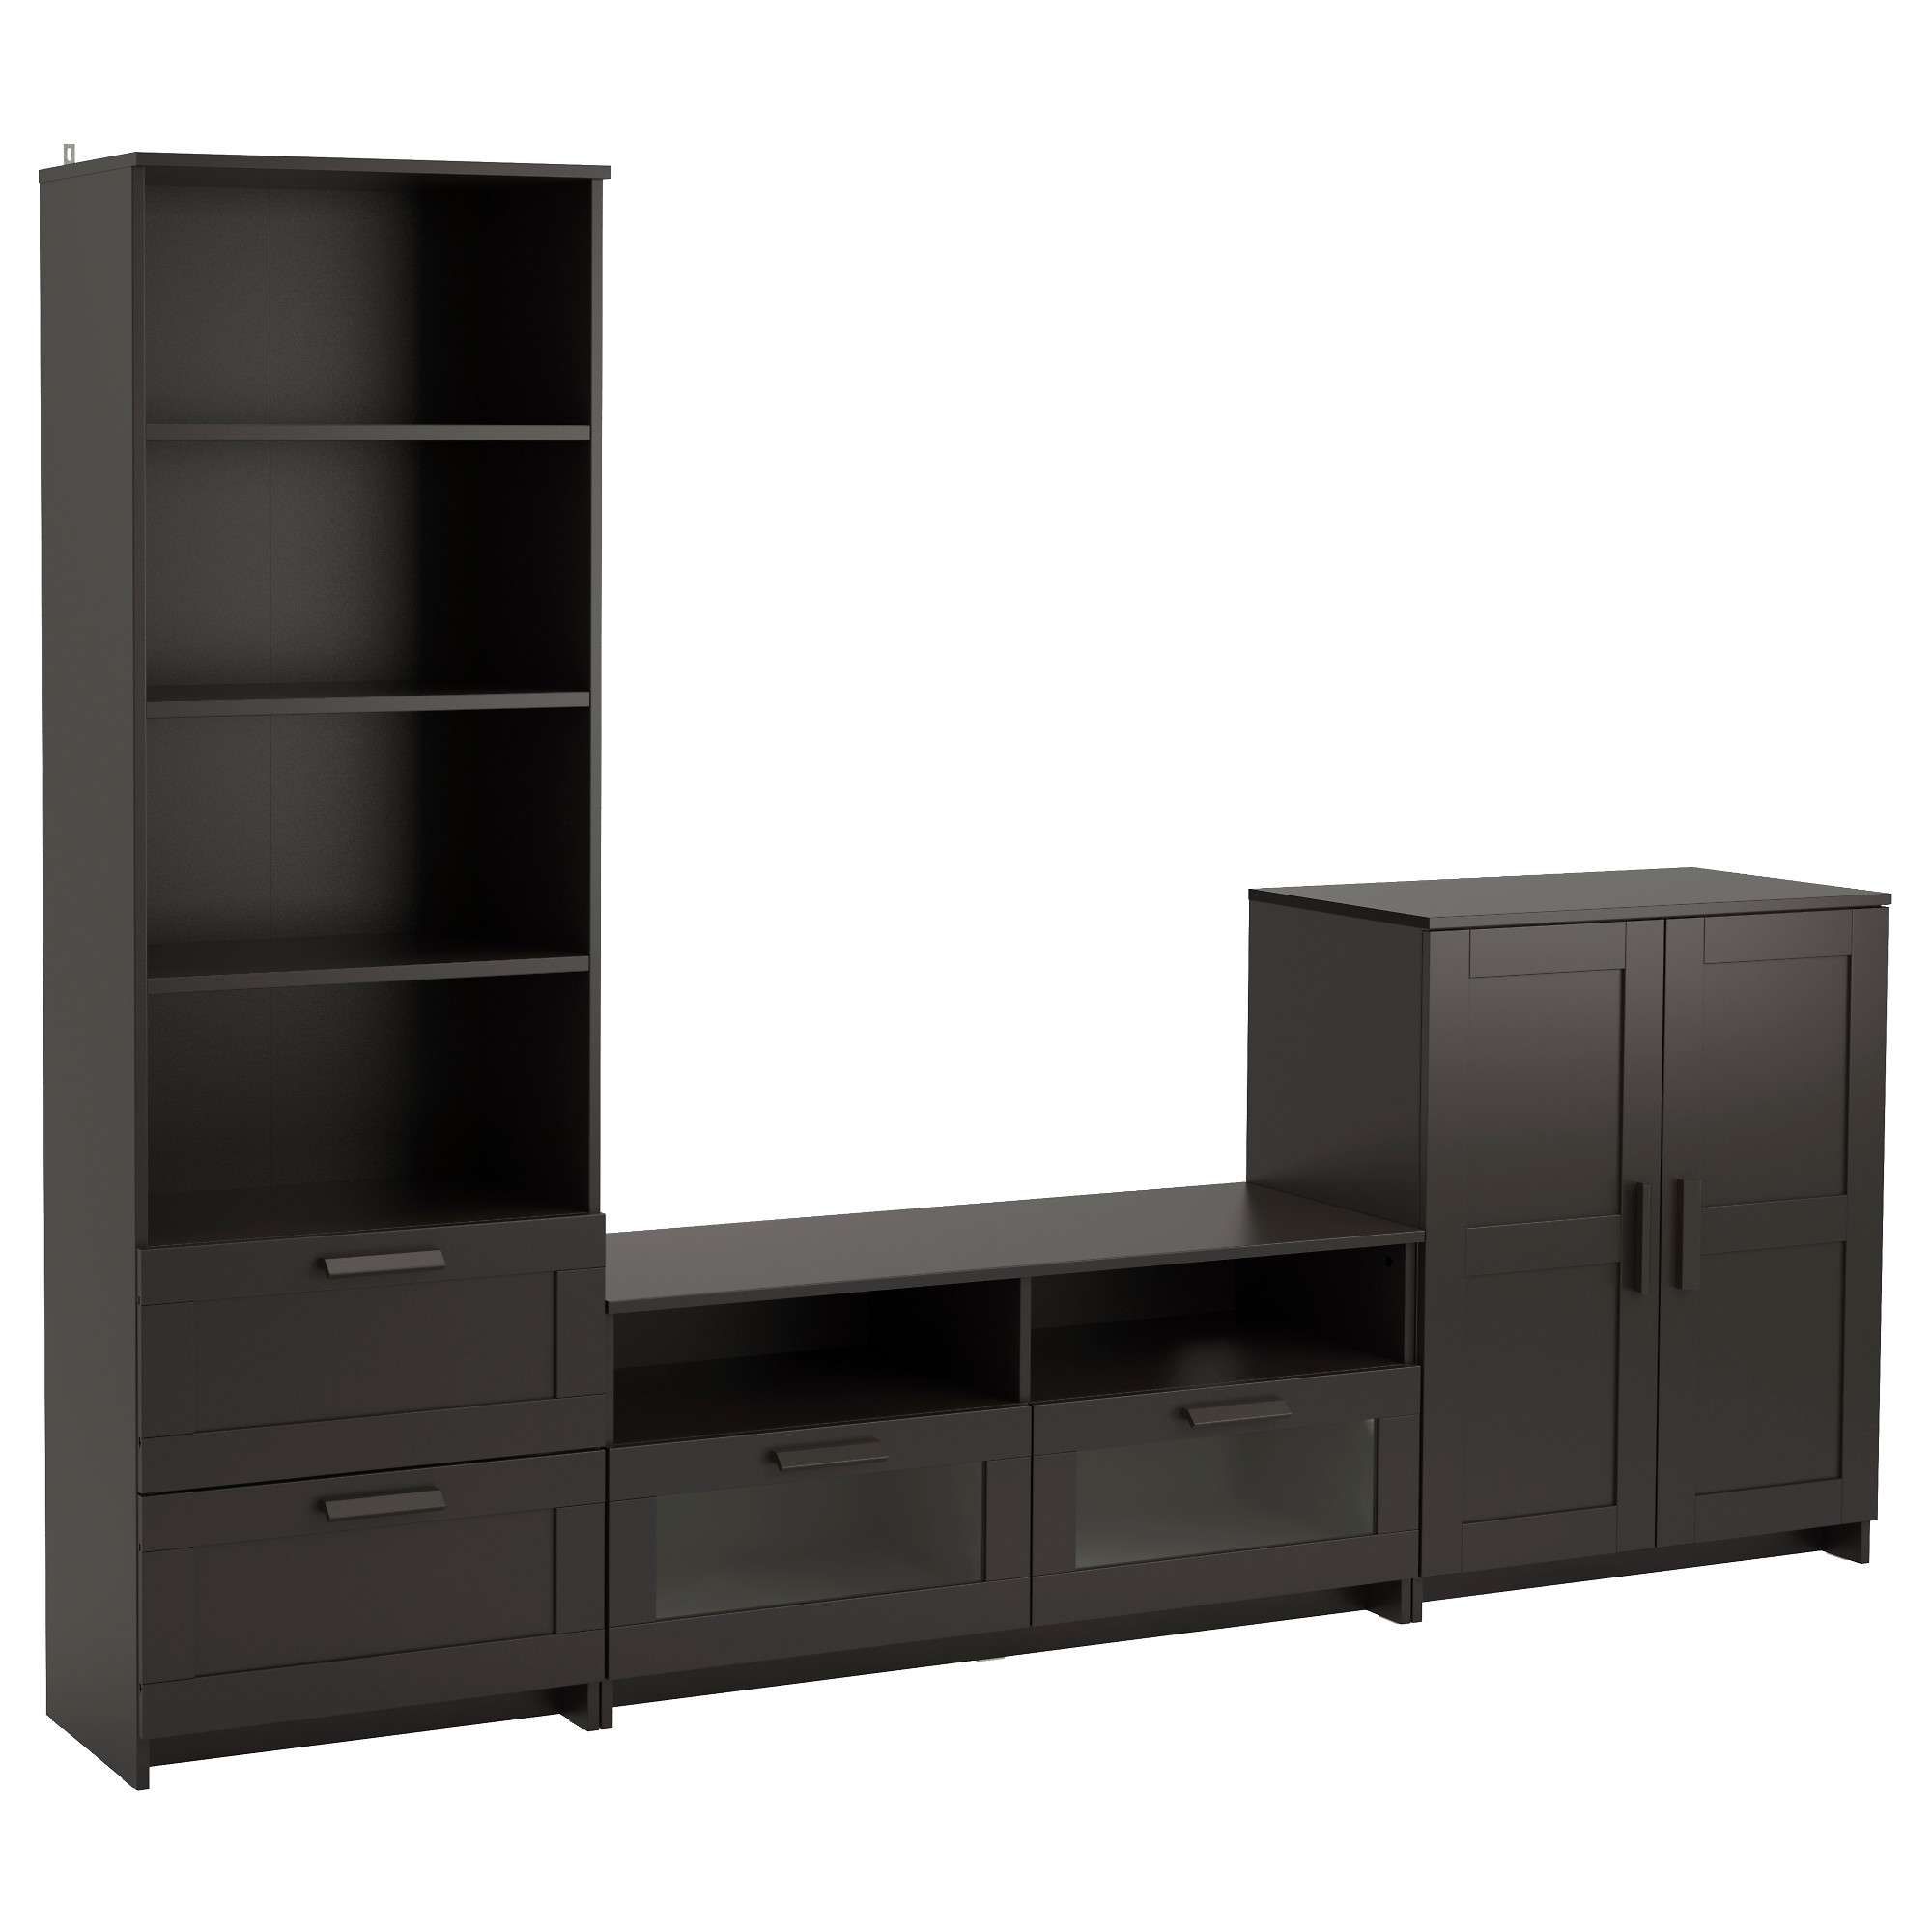 Tv Stands & Tv Units | Ikea In Black Tv Stands With Drawers (Gallery 8 of 15)